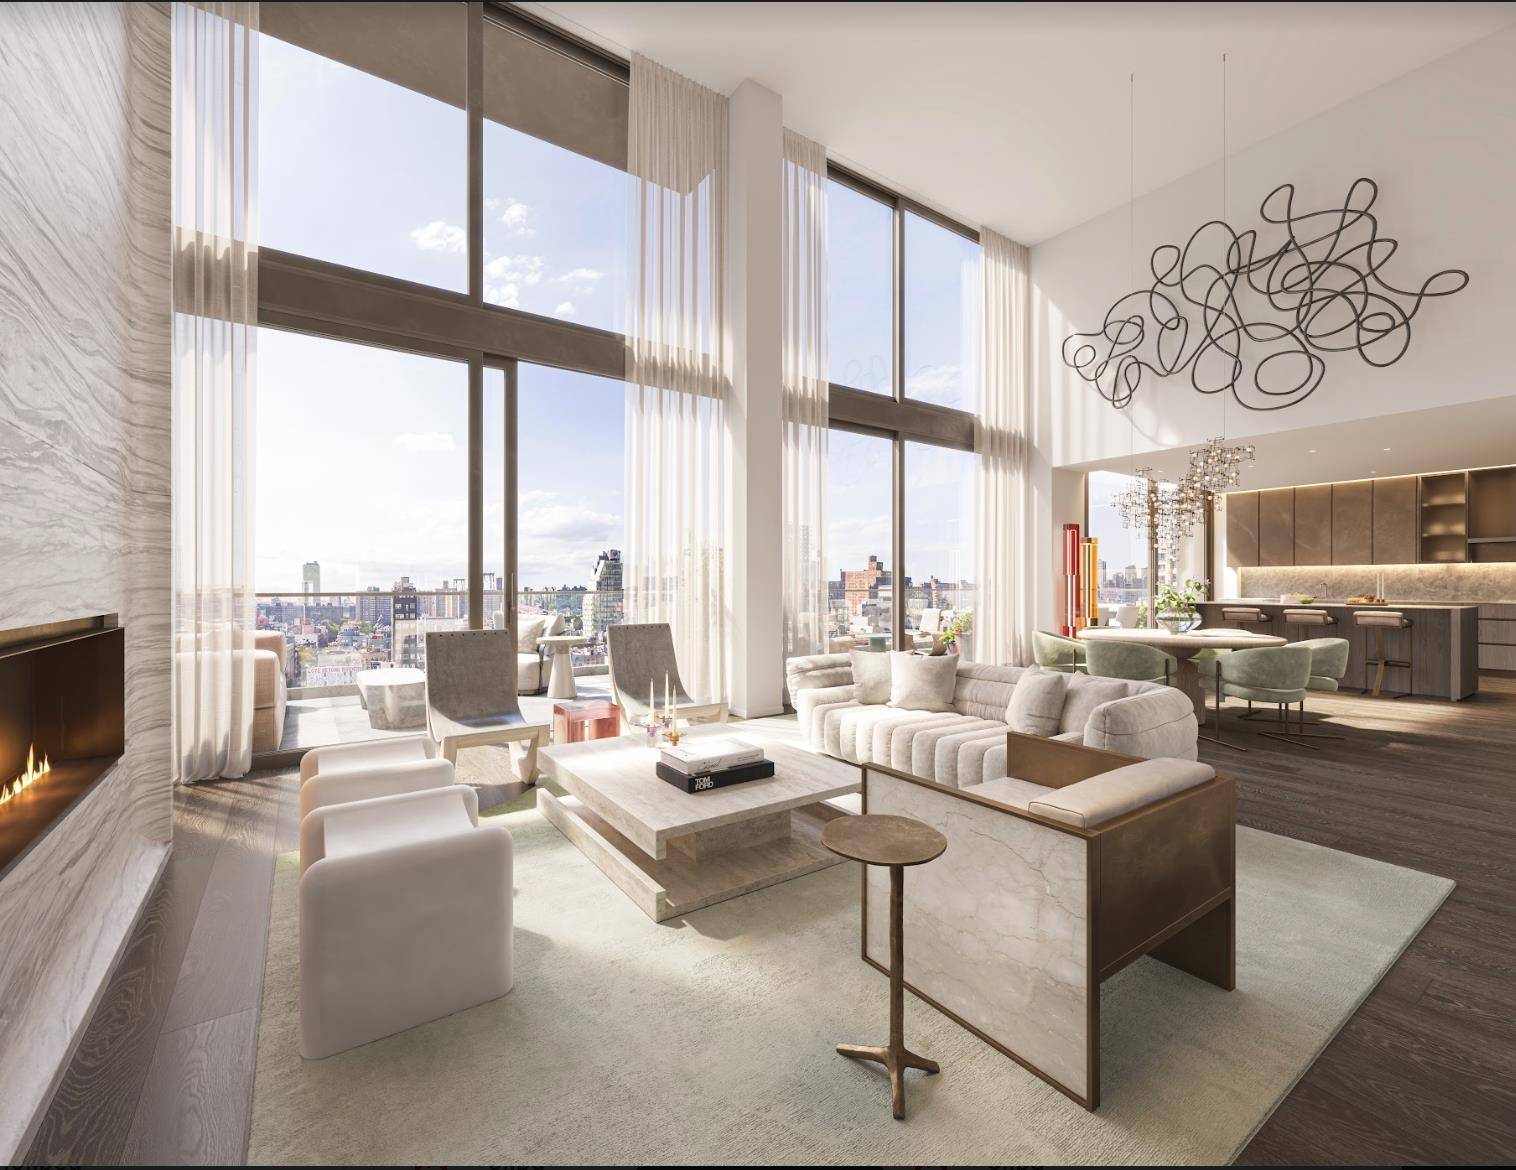 Internationally renowned designer and architect Thomas Juul Hansen lends his extraordinary vision to 199 Chrystie, where luxury, style, and functionality masterfully intersect.